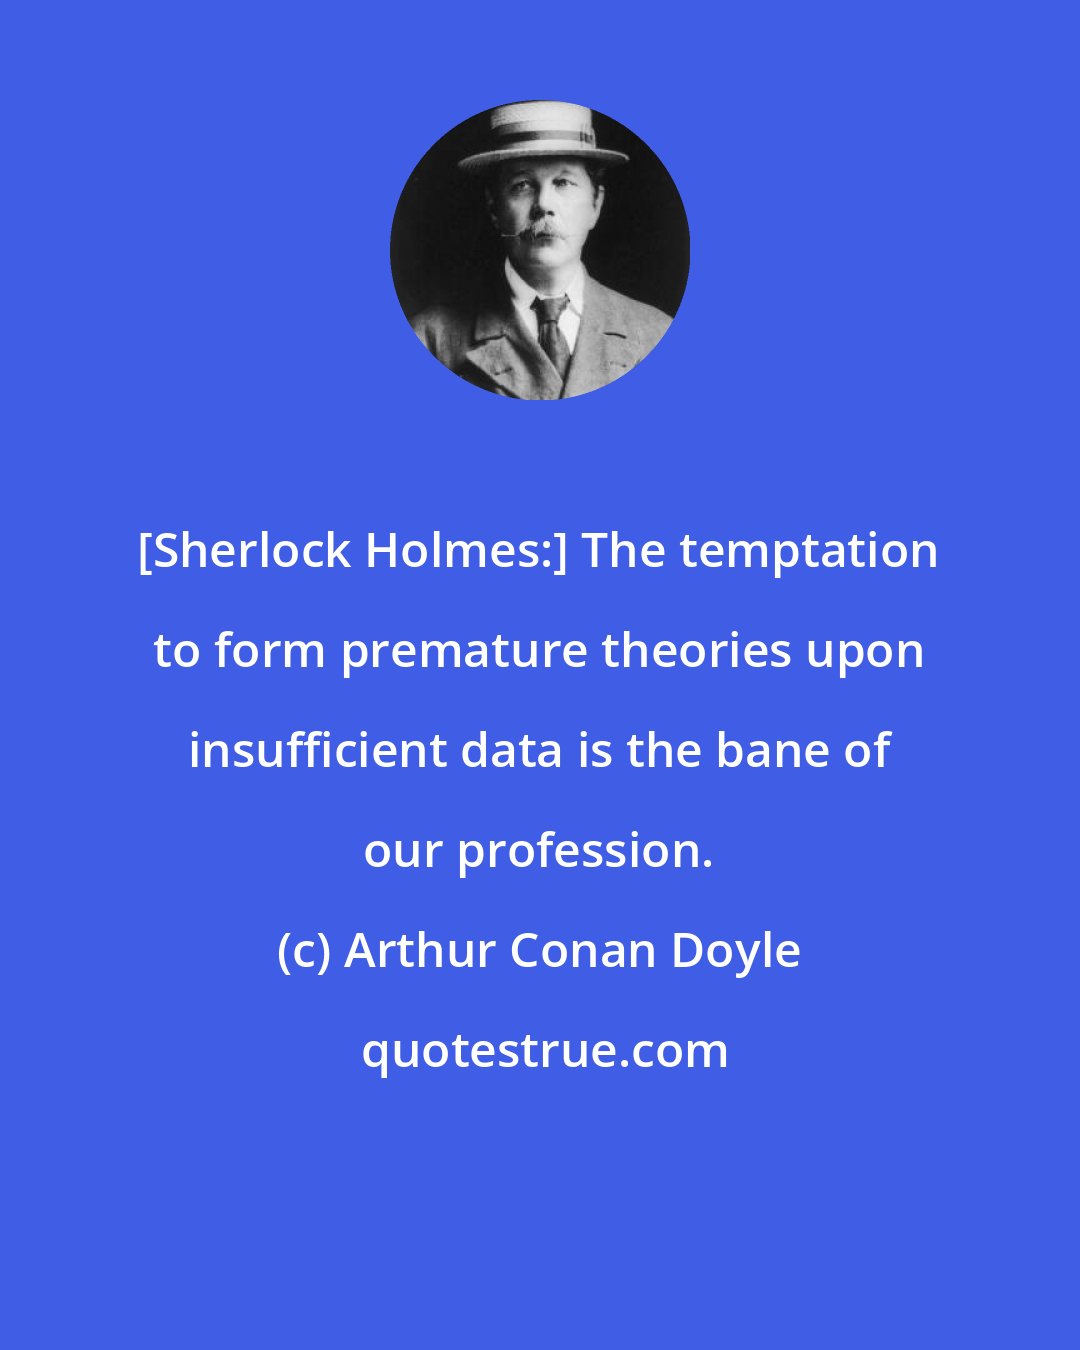 Arthur Conan Doyle: [Sherlock Holmes:] The temptation to form premature theories upon insufficient data is the bane of our profession.